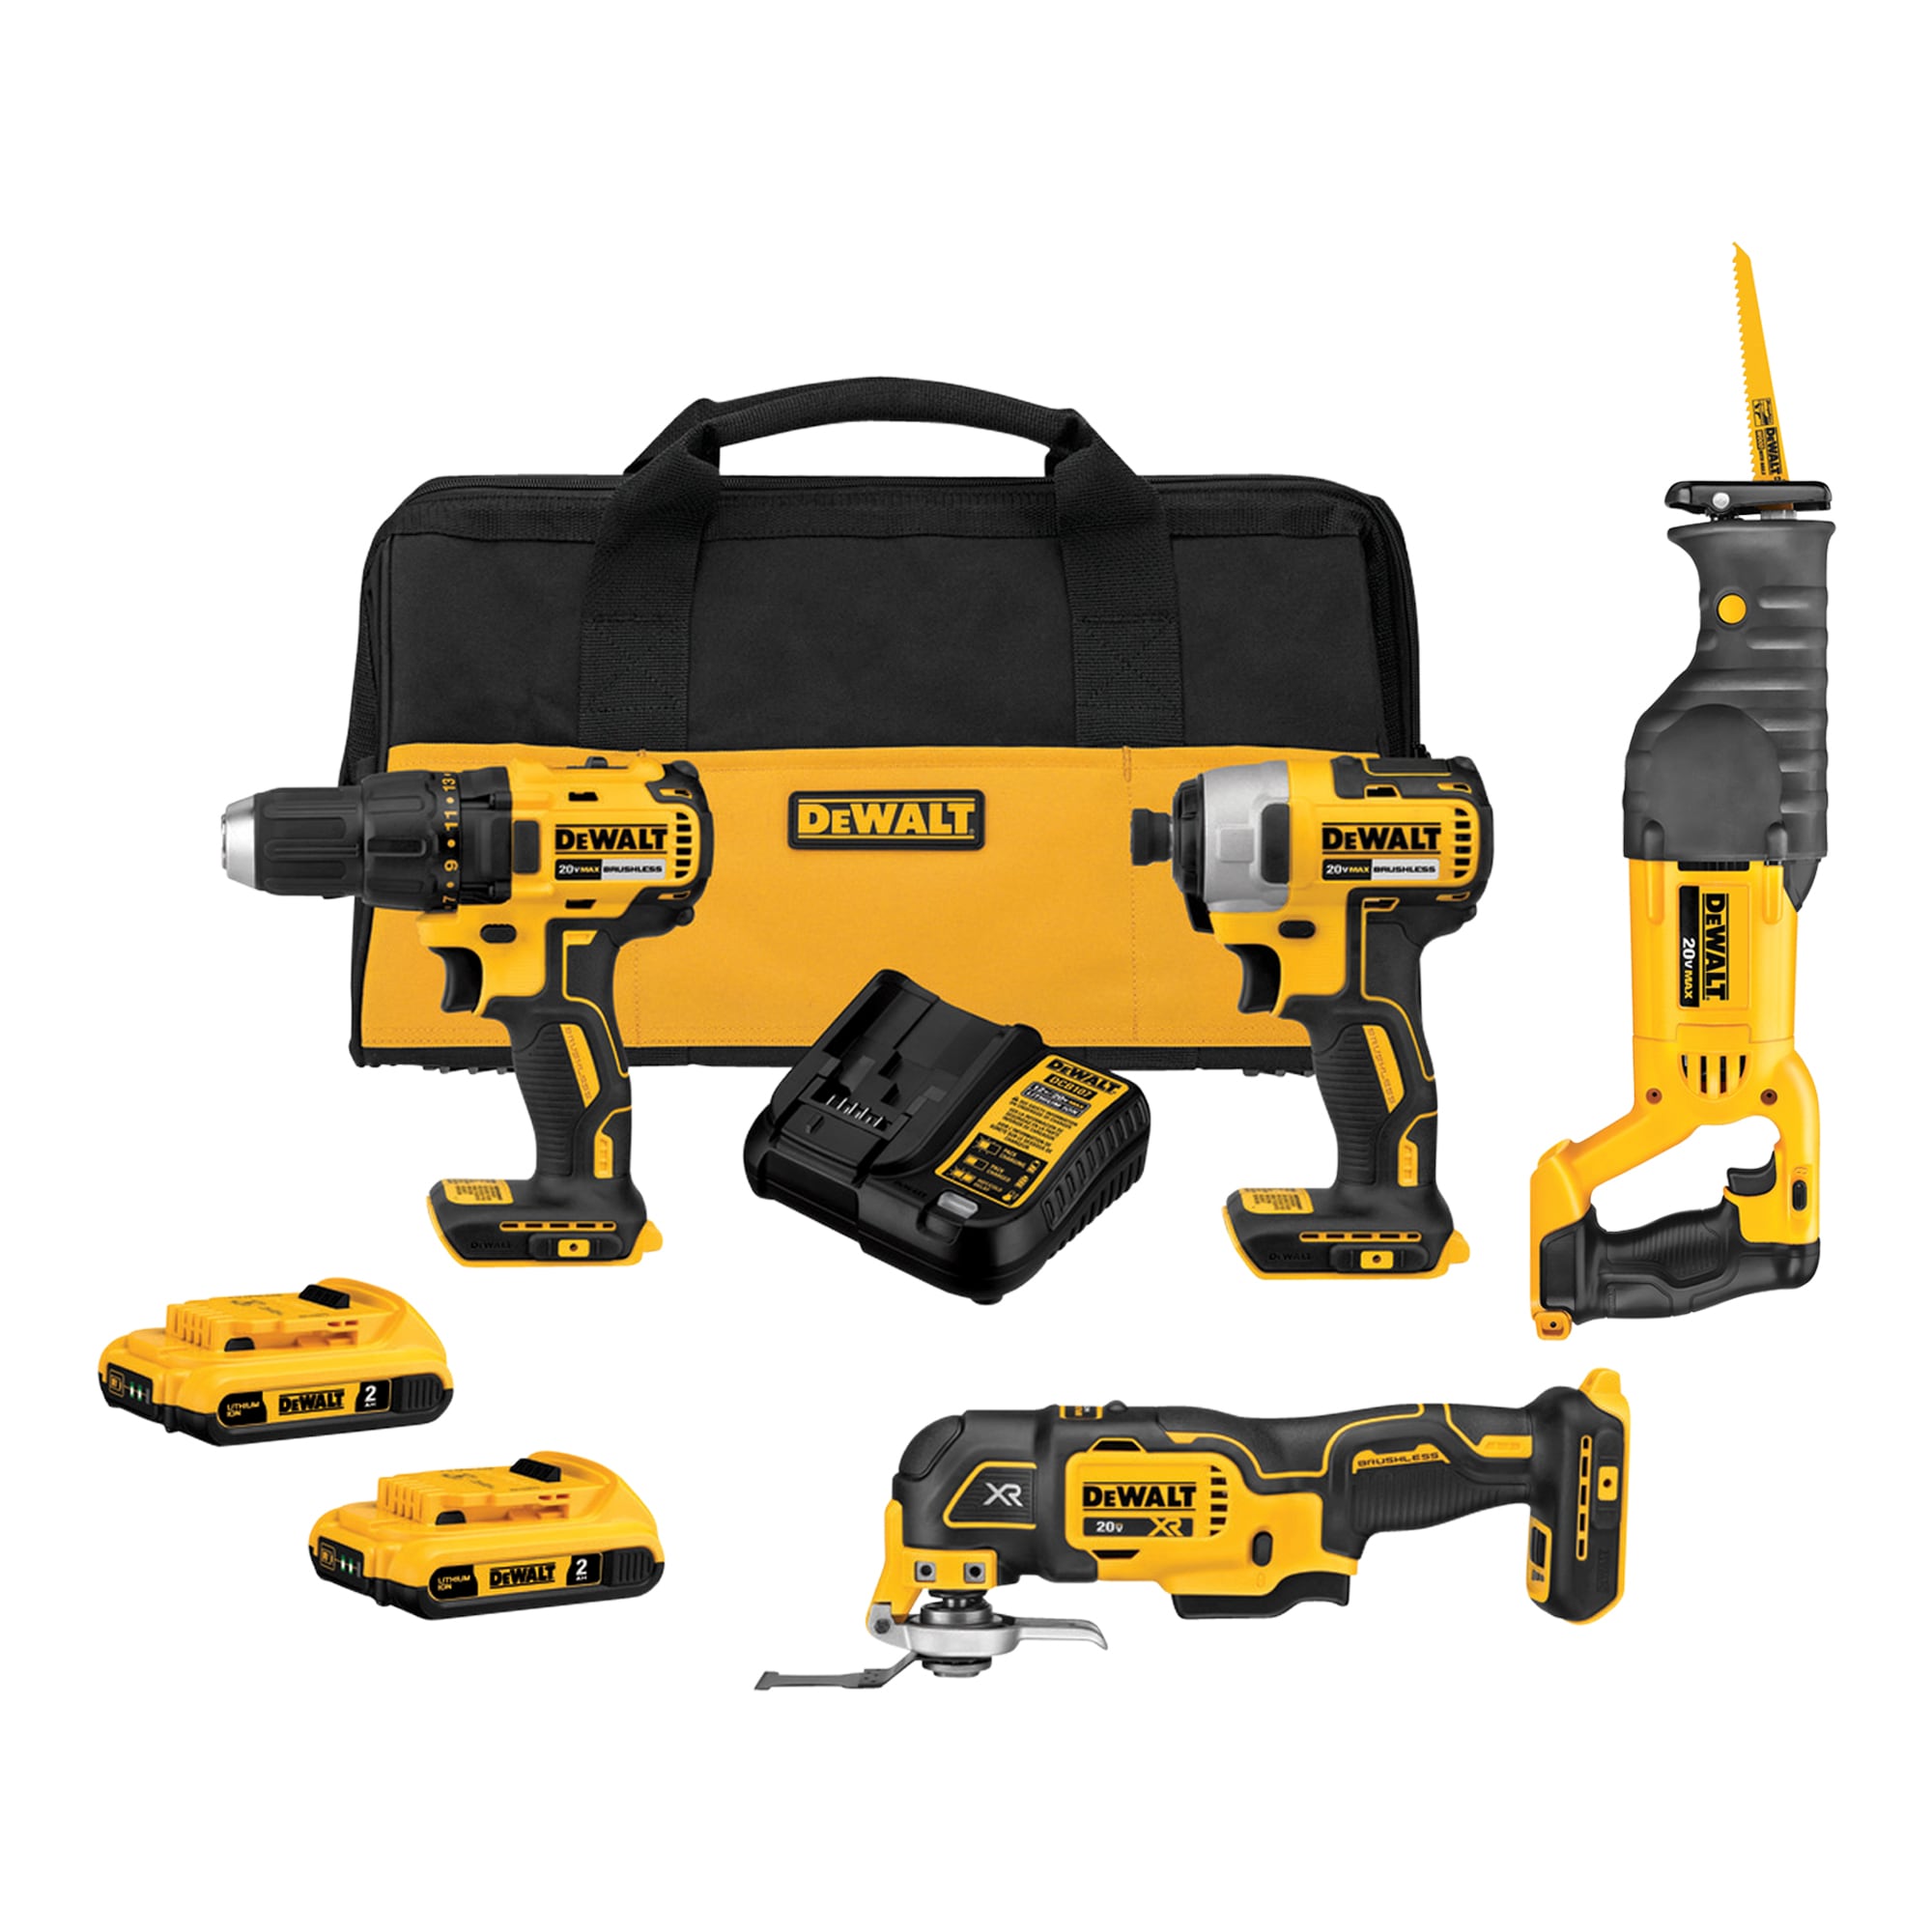 DEWALT 3-Tool 20-Volt Max Brushless Power Tool Combo Kit with Soft Case (2-Batteries and charger Included) & 20-volt Max Variable Speed Cordless